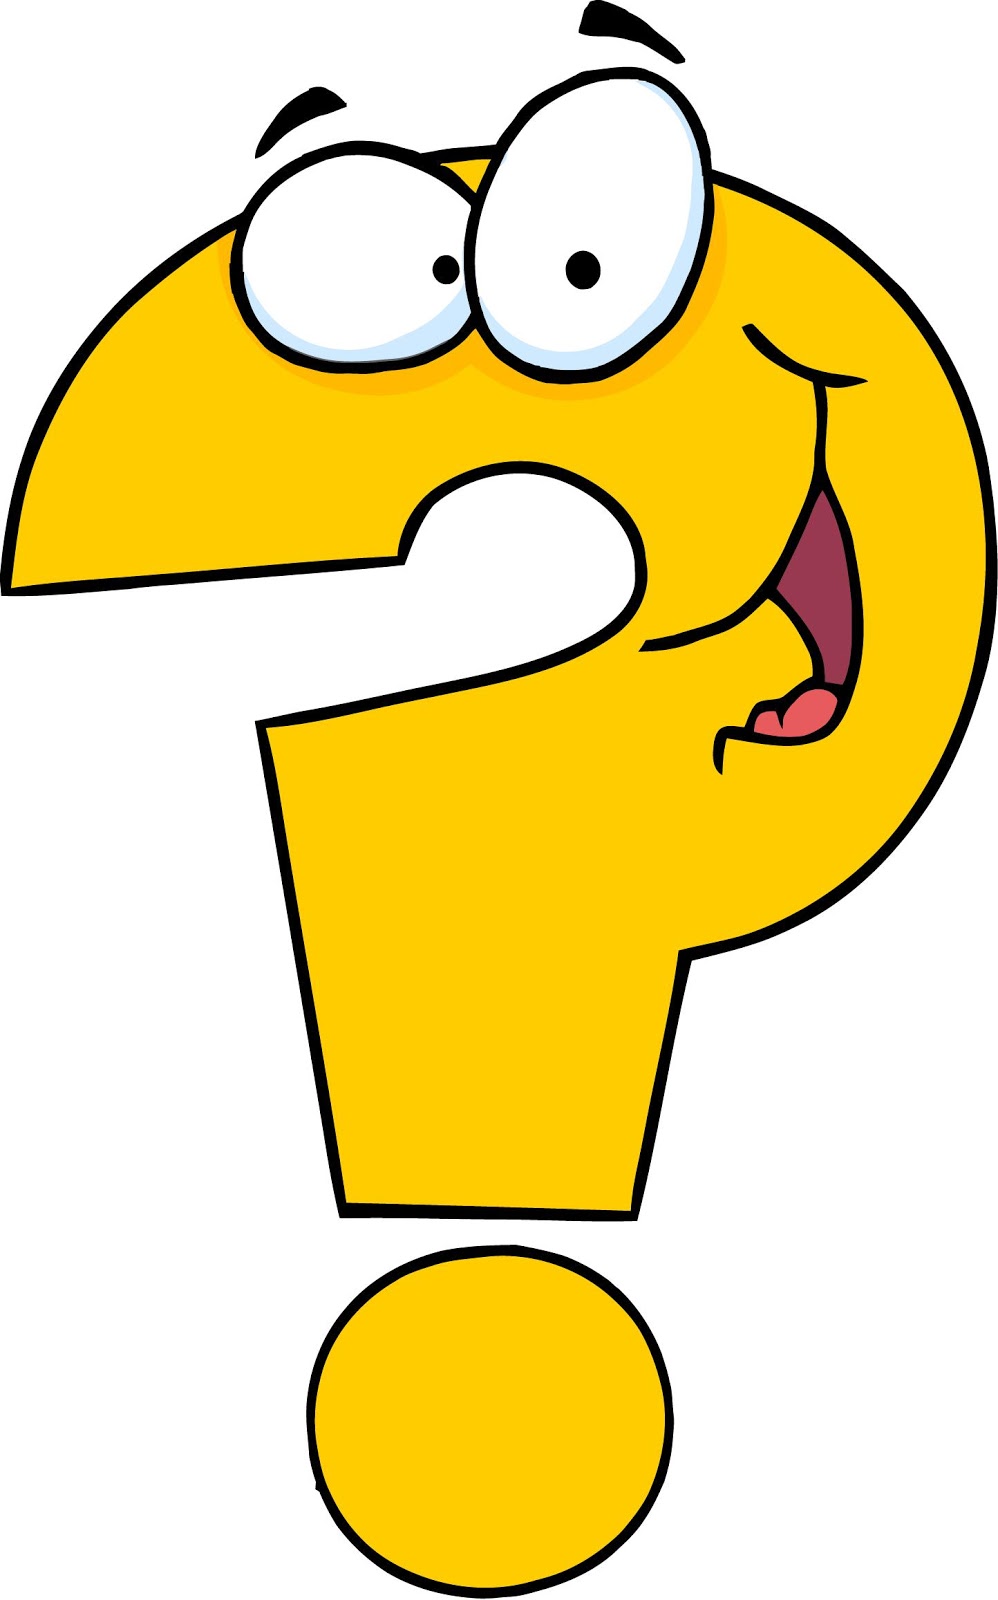 animated clipart of question mark - photo #10